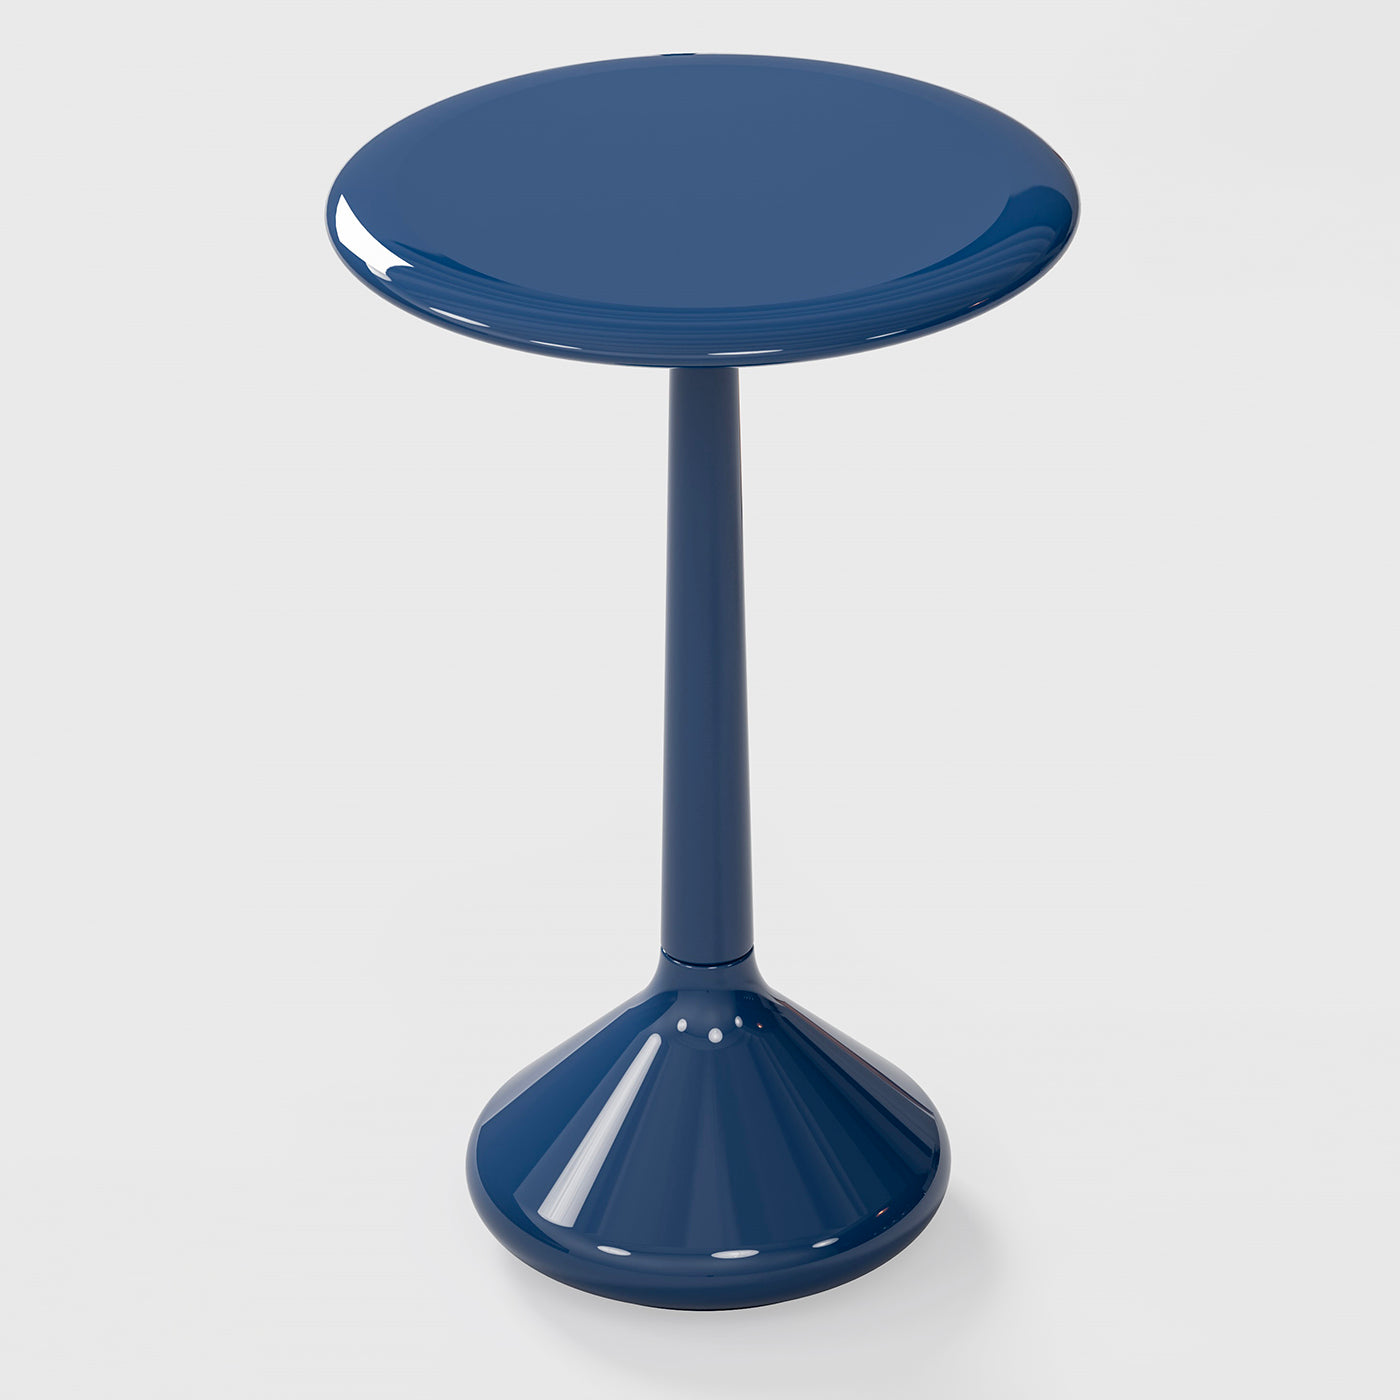 Glossy Laquered Blue Side Table - Alternative view 1